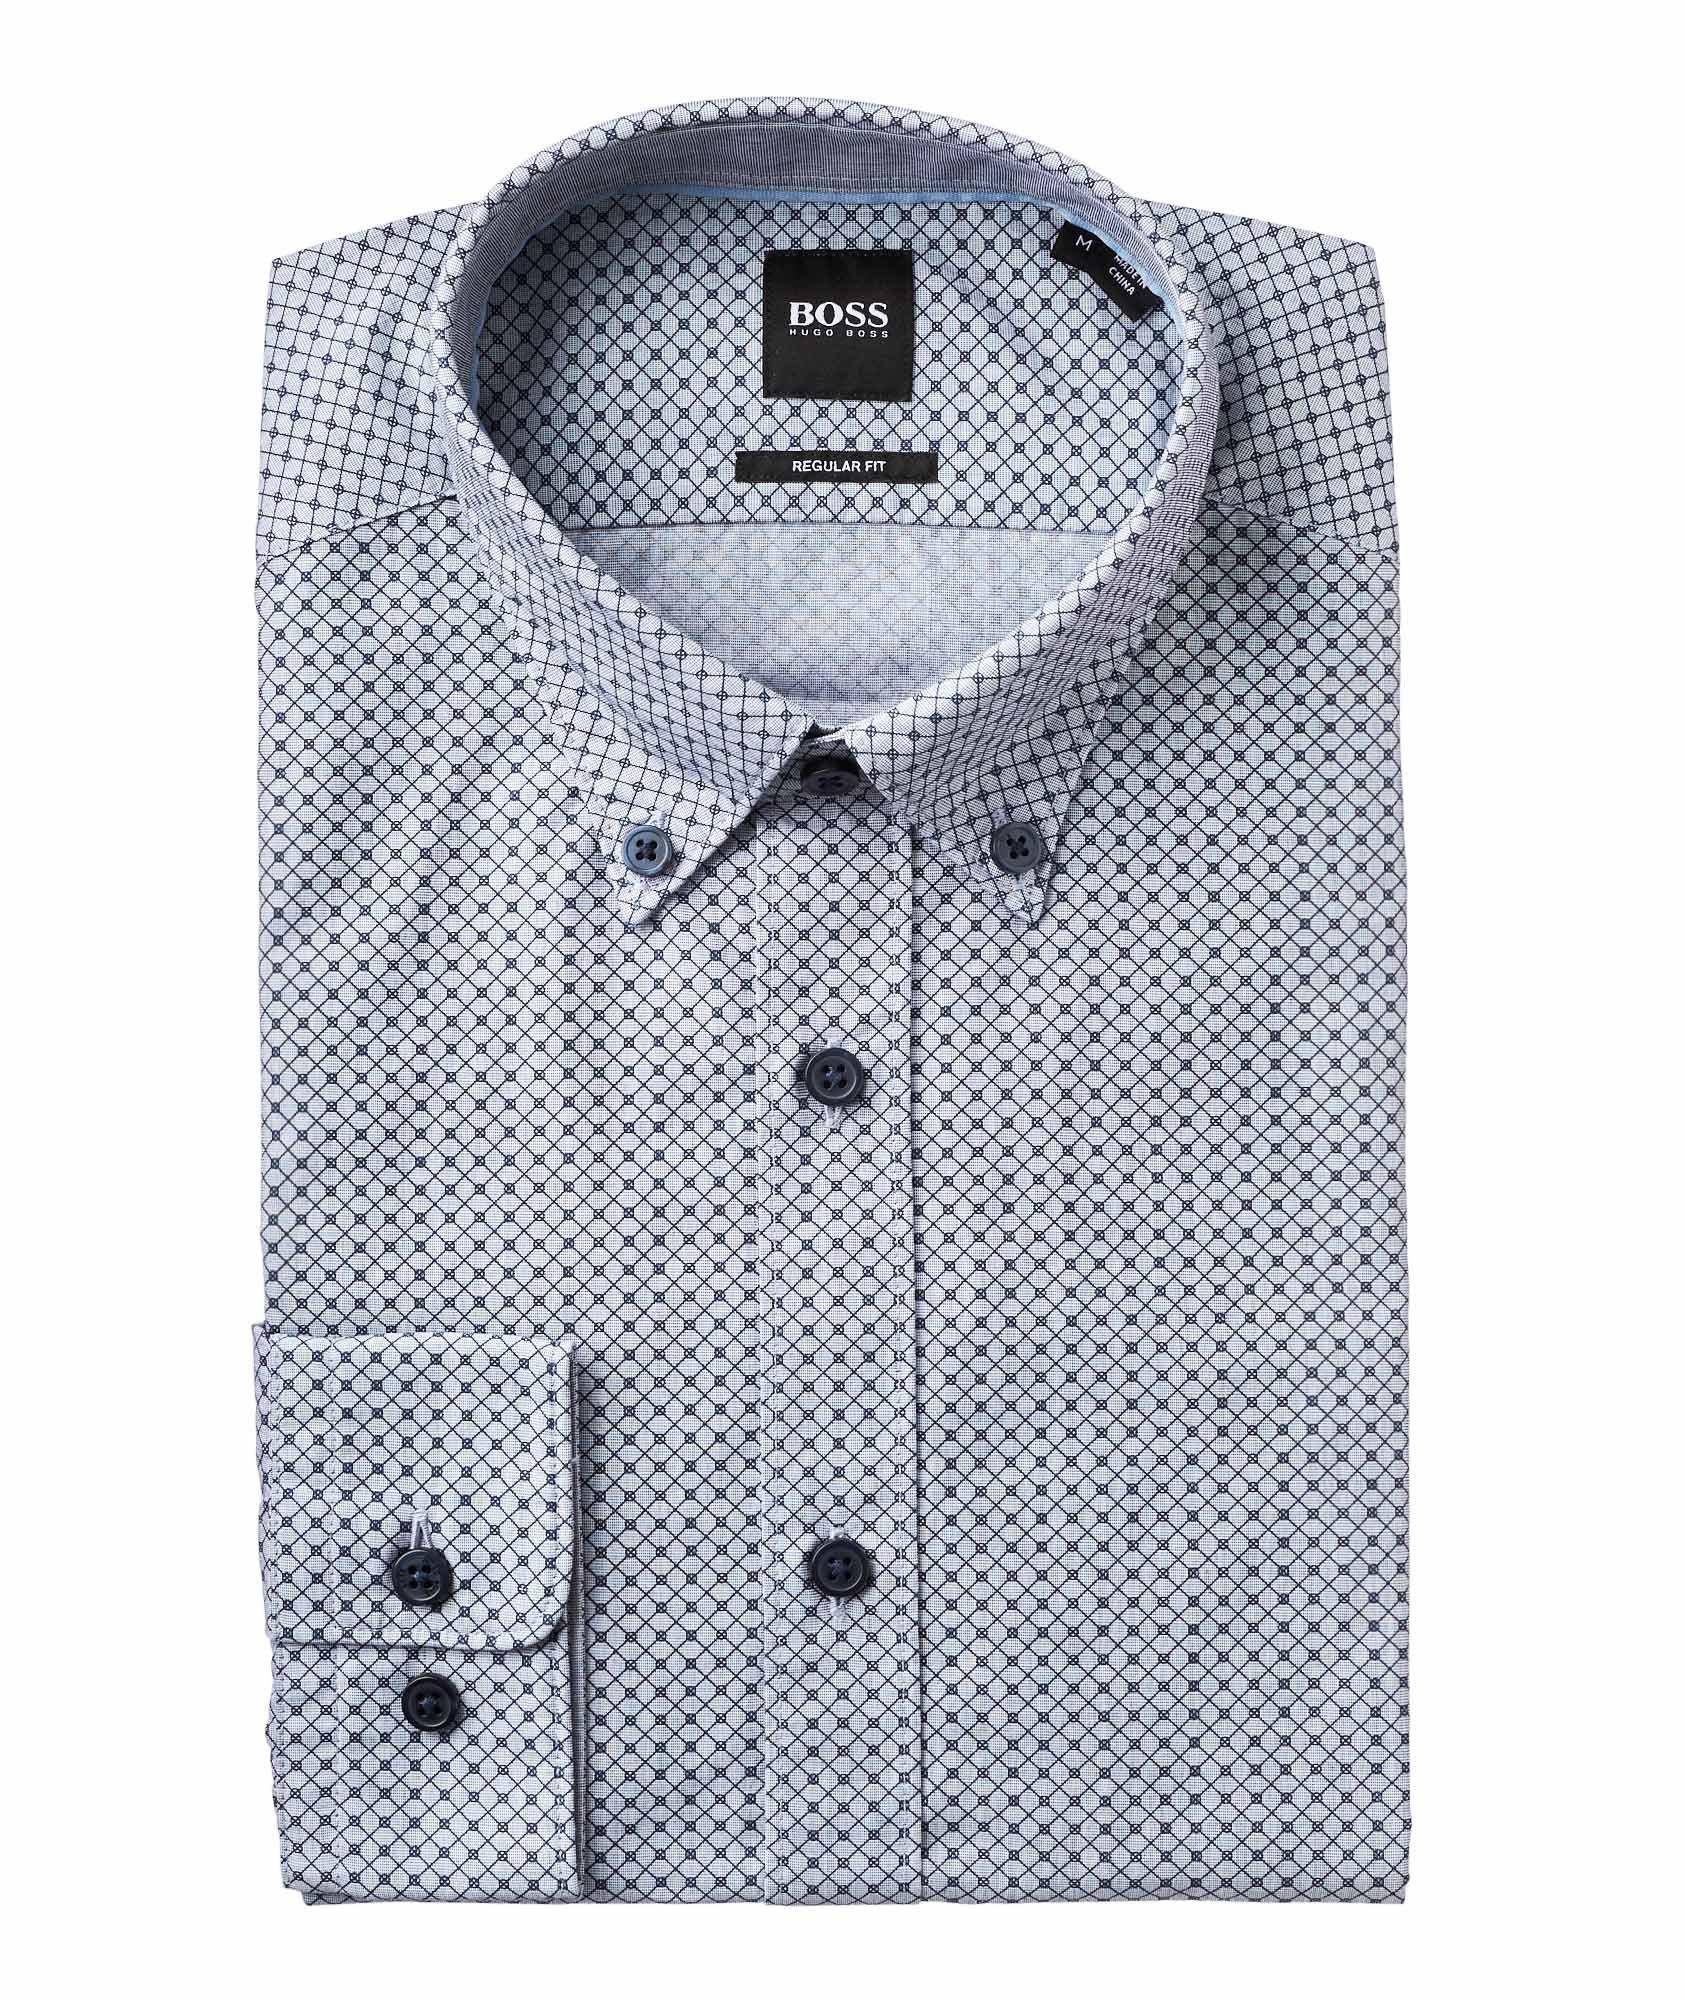 Contemporary Fit Neat-Printed Cotton Shirt image 0